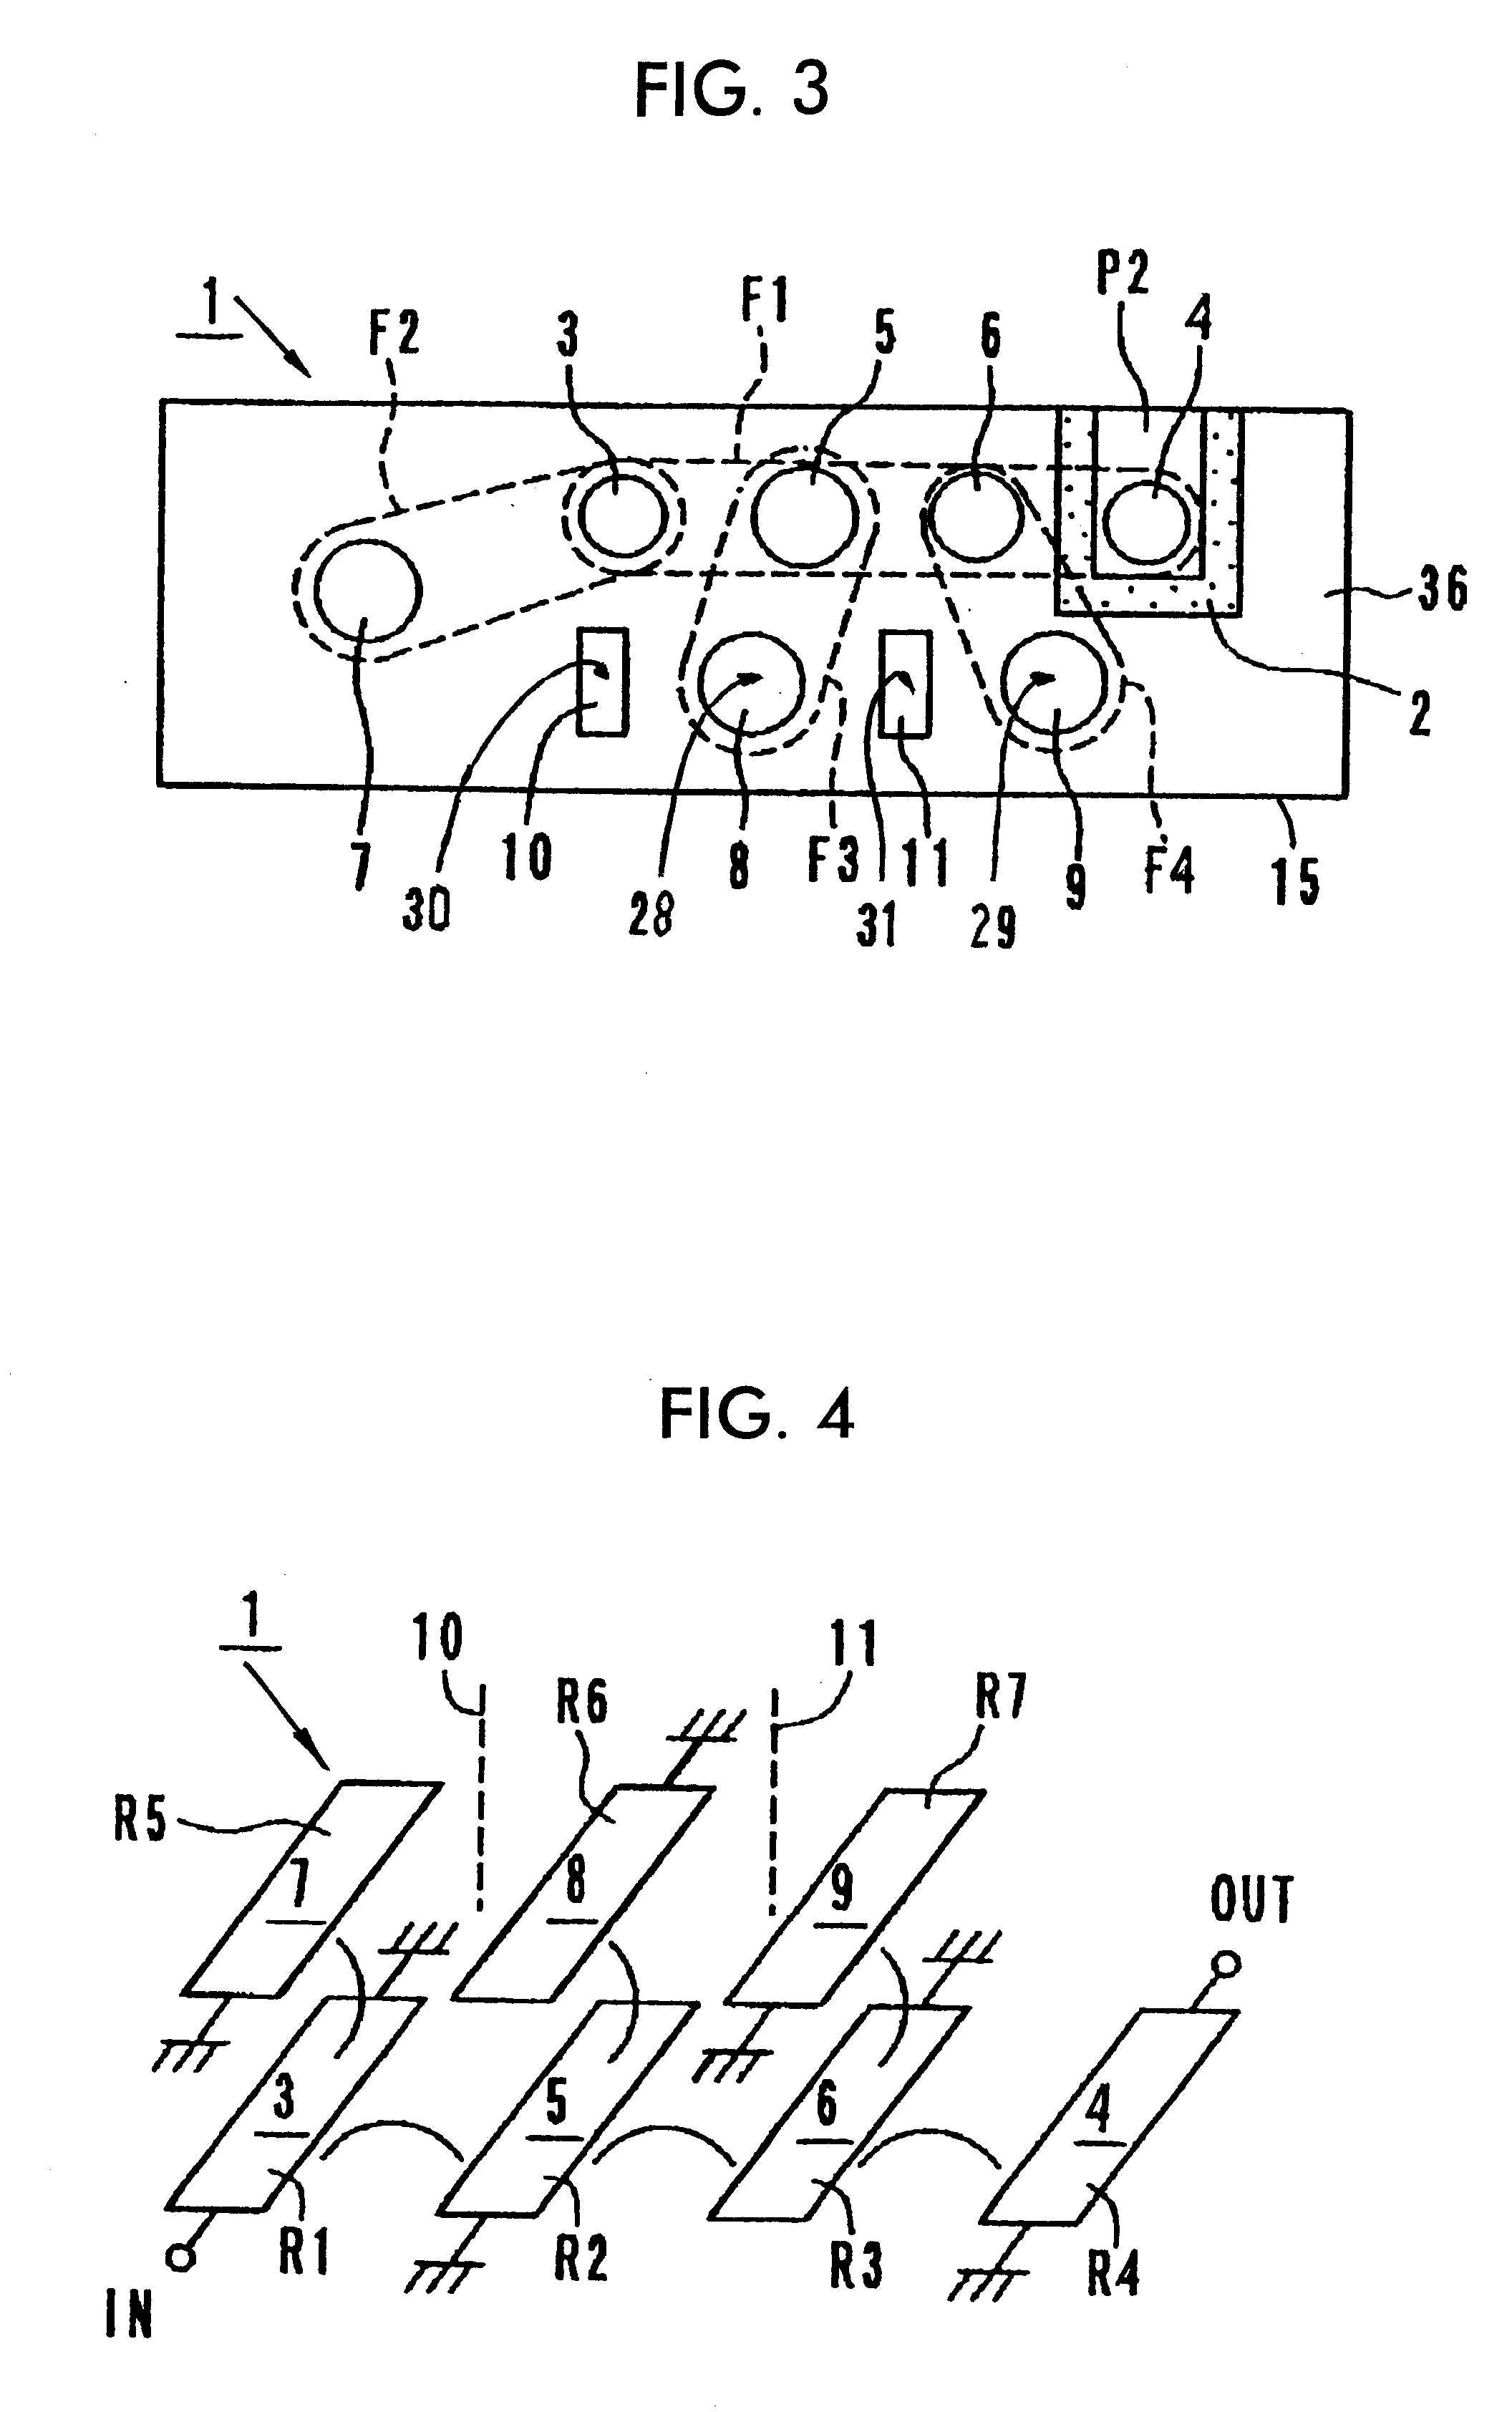 Filter unit comprising a wideband bandpass filter and one band-elimination filter